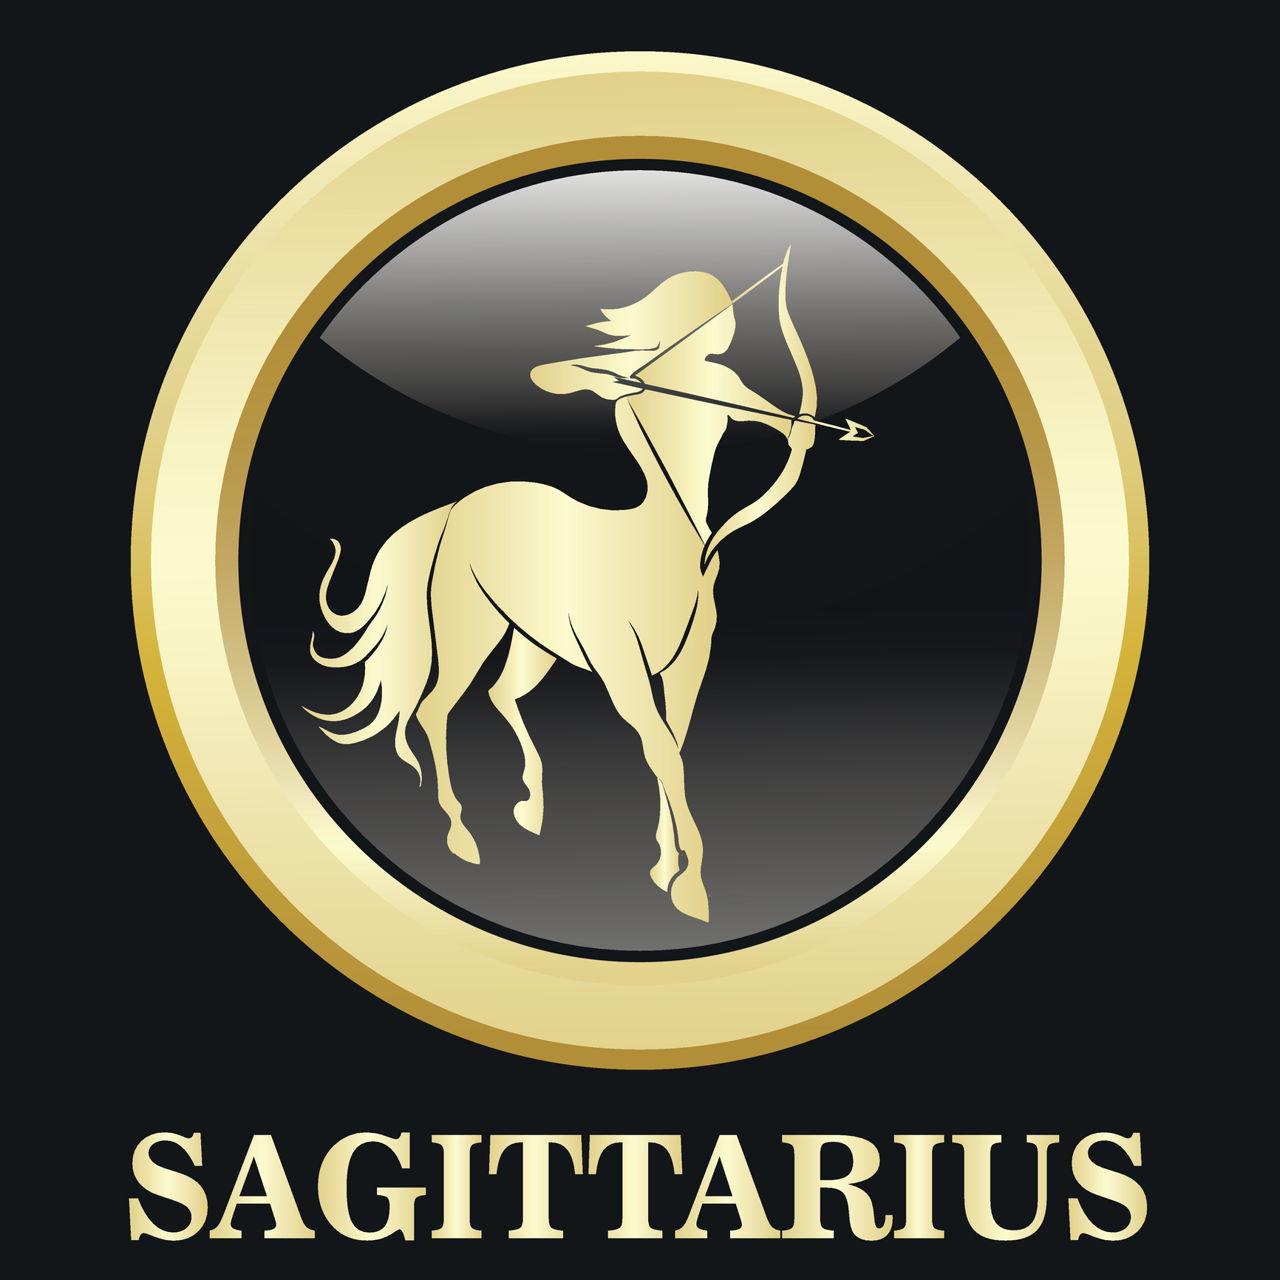 What to say to a sagittarius man